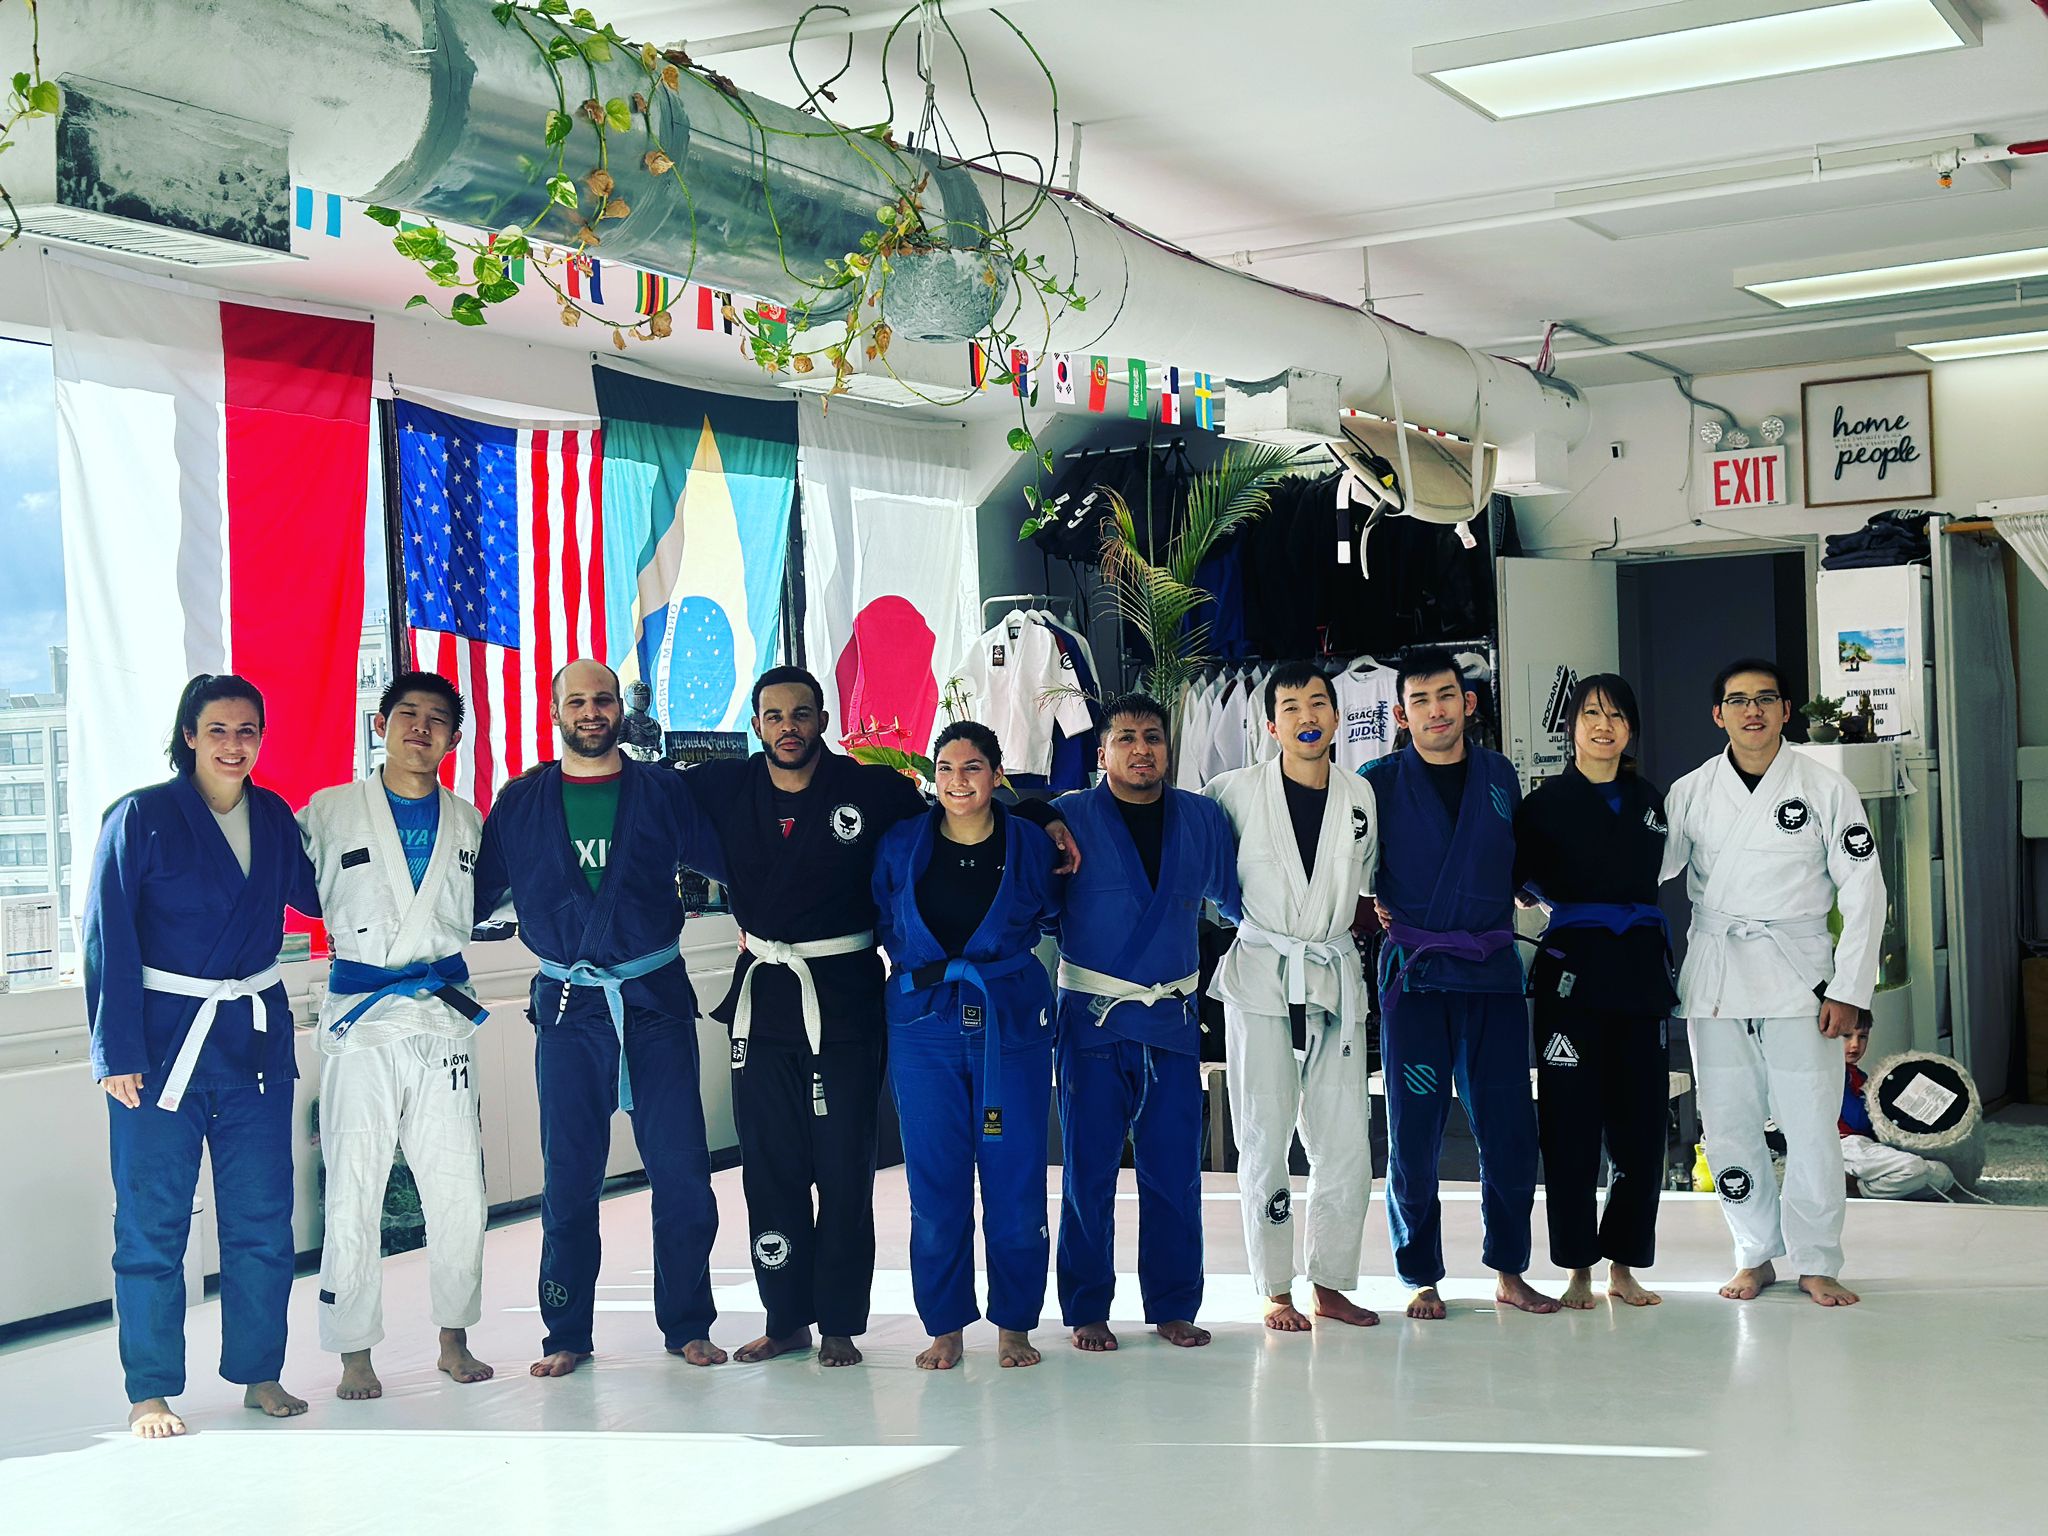 Why Sunnyside New Yorkers Join Rocian Gracie Jr. Academy in Queens, New York